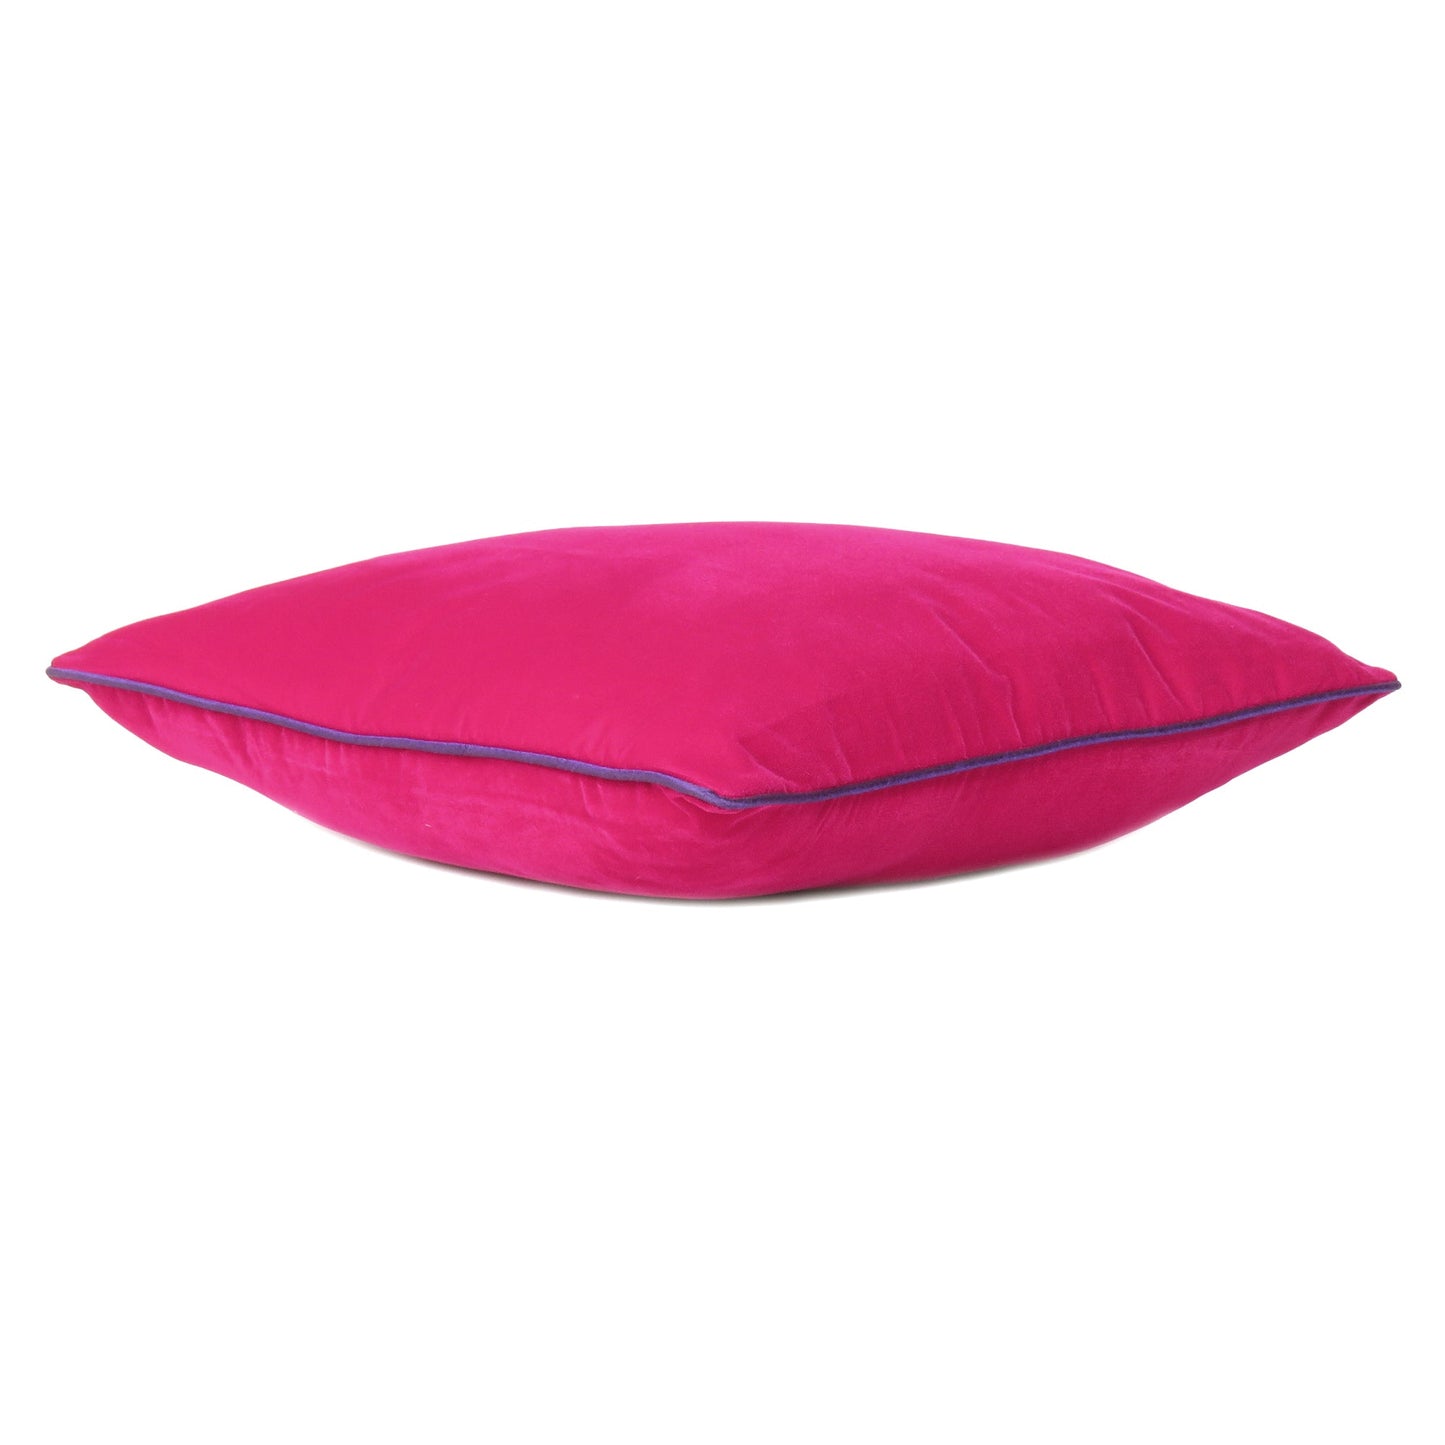 Pink Velvet Cushion Cover with Purple Piping Edge in Set of 2